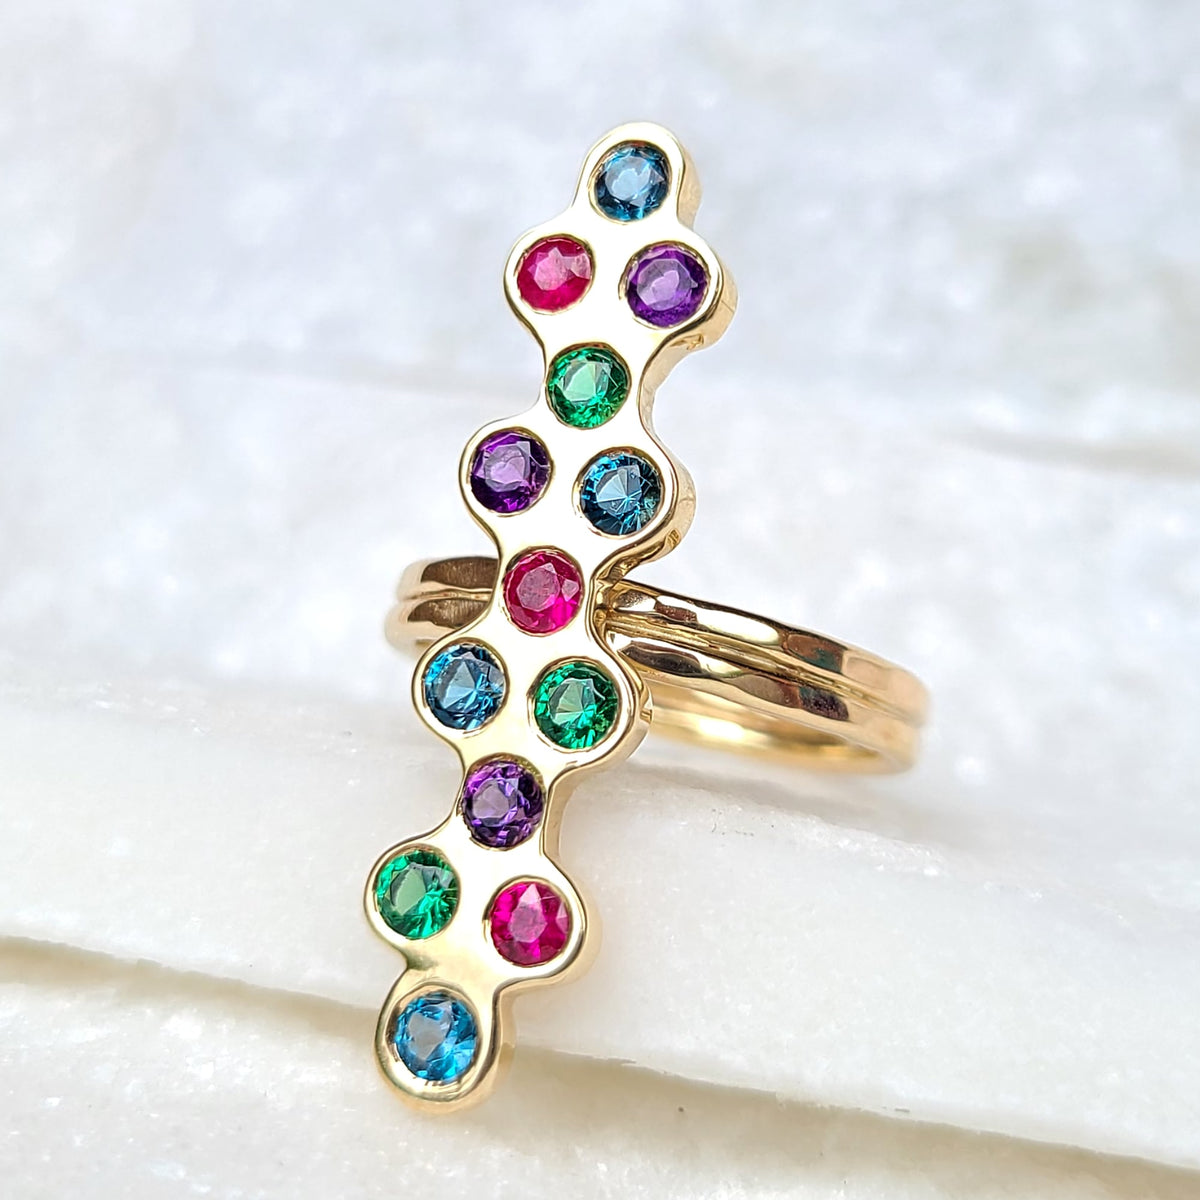 Sincerely Ginger Jewelry 14K Chrome Diopside Topaz Amethyst and Ruby Ring in Yellow Gold